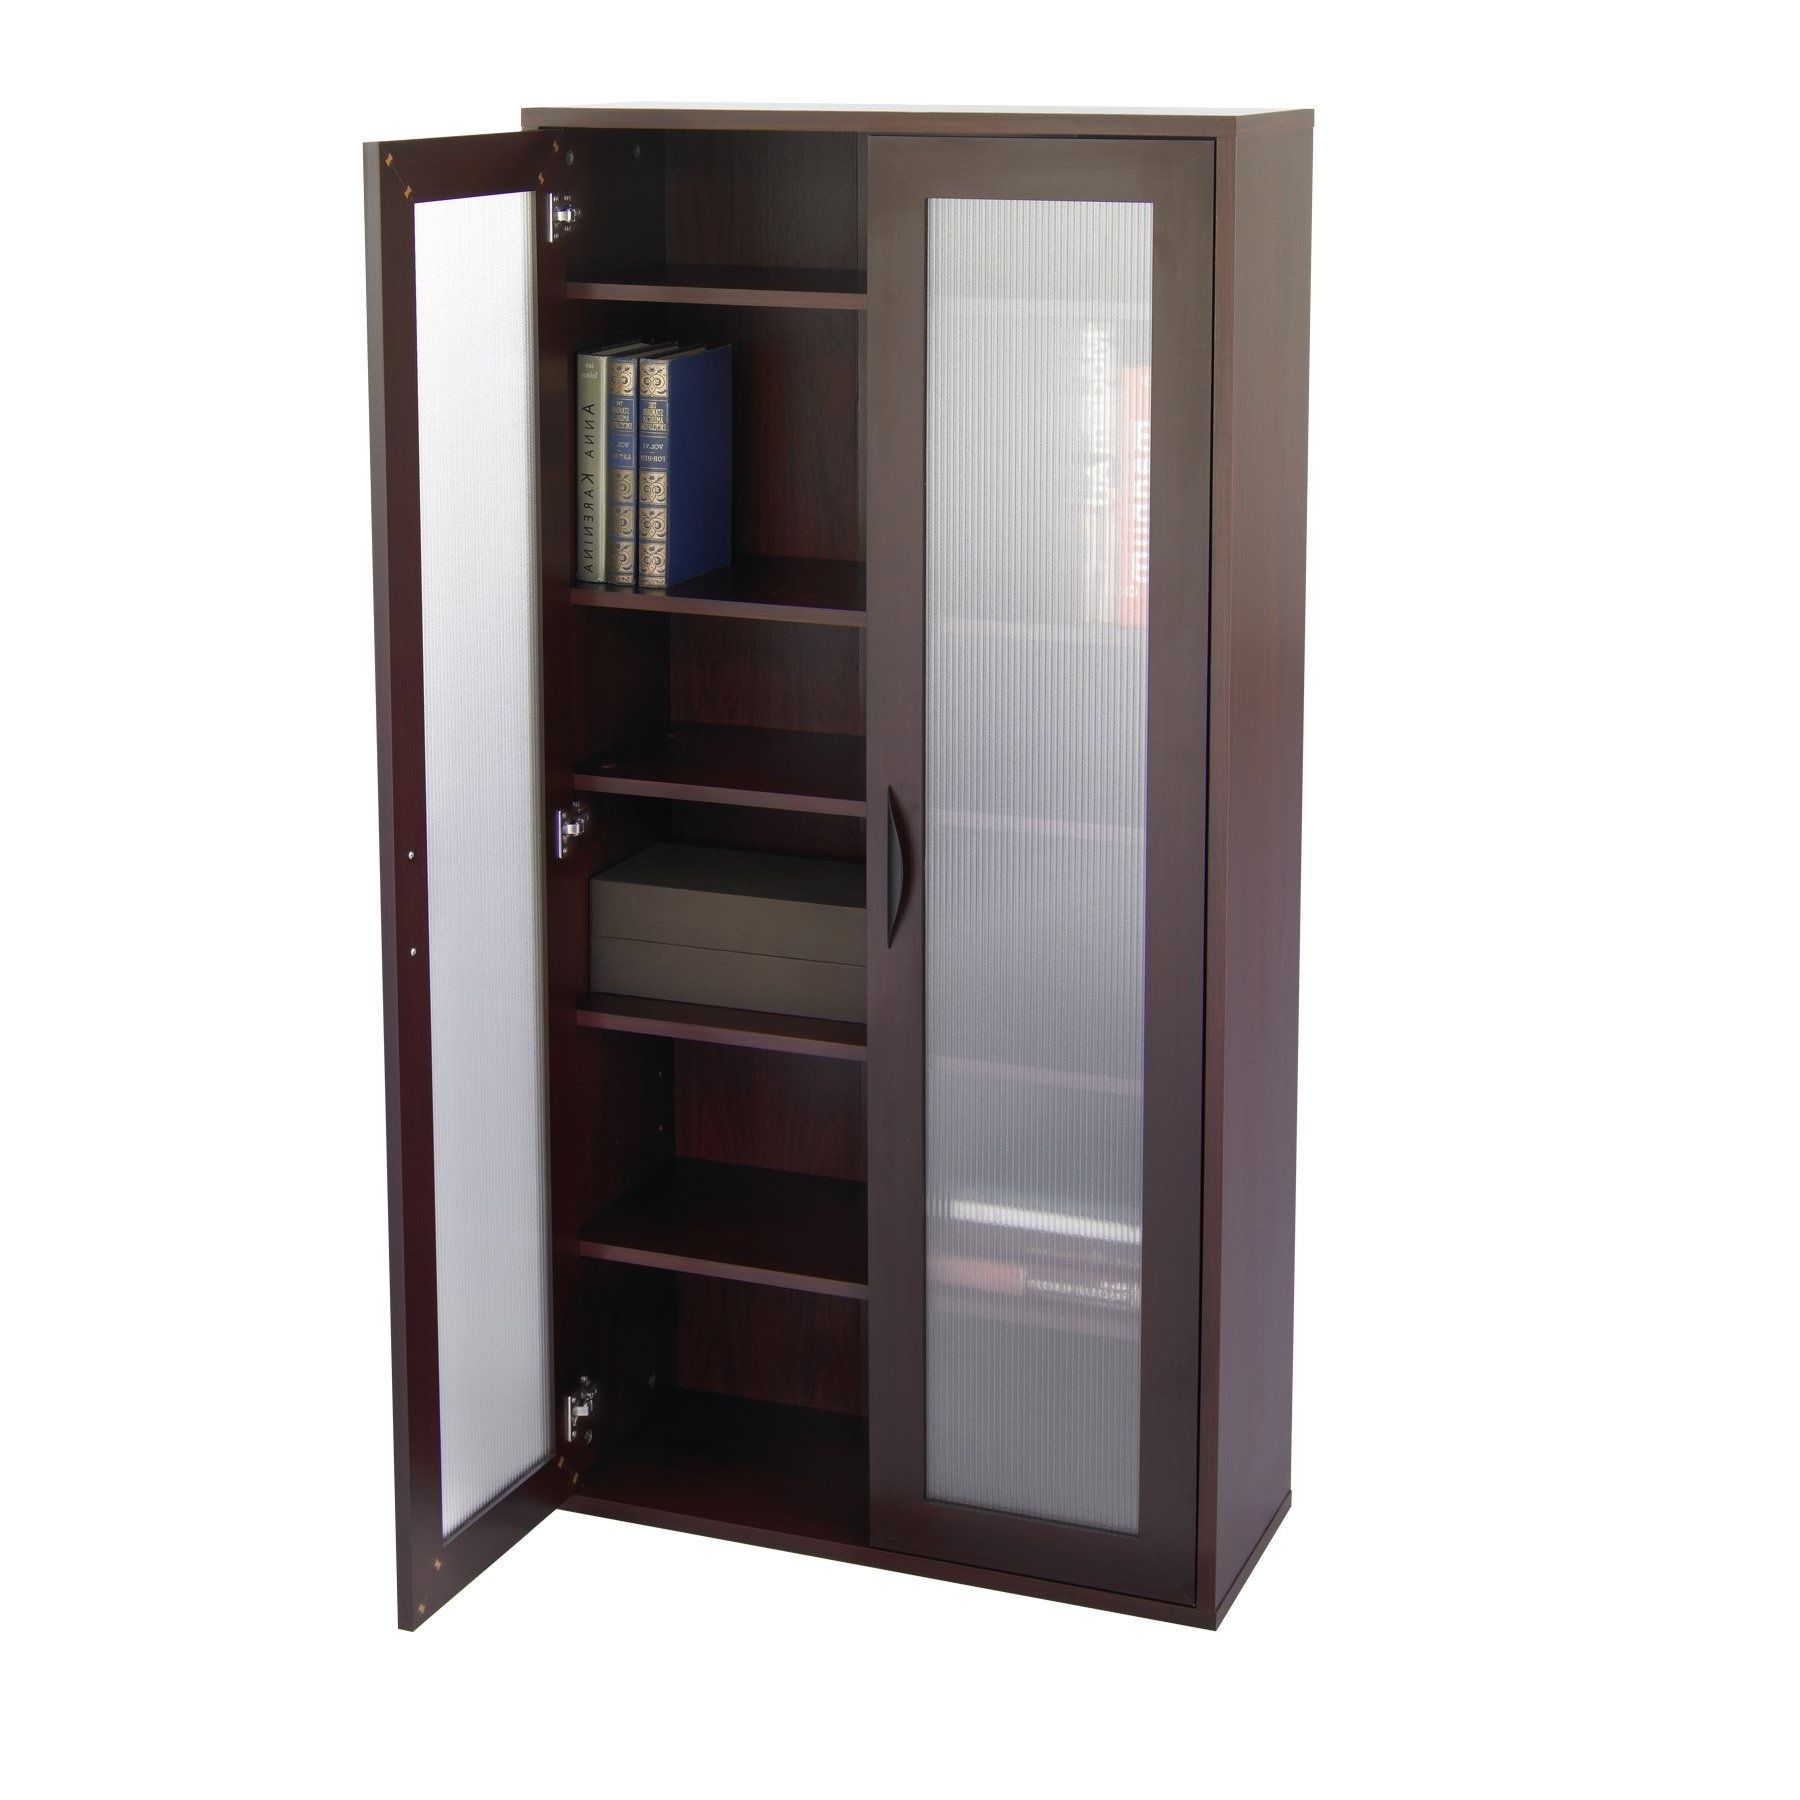 Well Liked Black Bookcases With Glass Doors Intended For Storage Bookcase With Glass Doors Tall – Mahogany – Walmart (View 13 of 15)